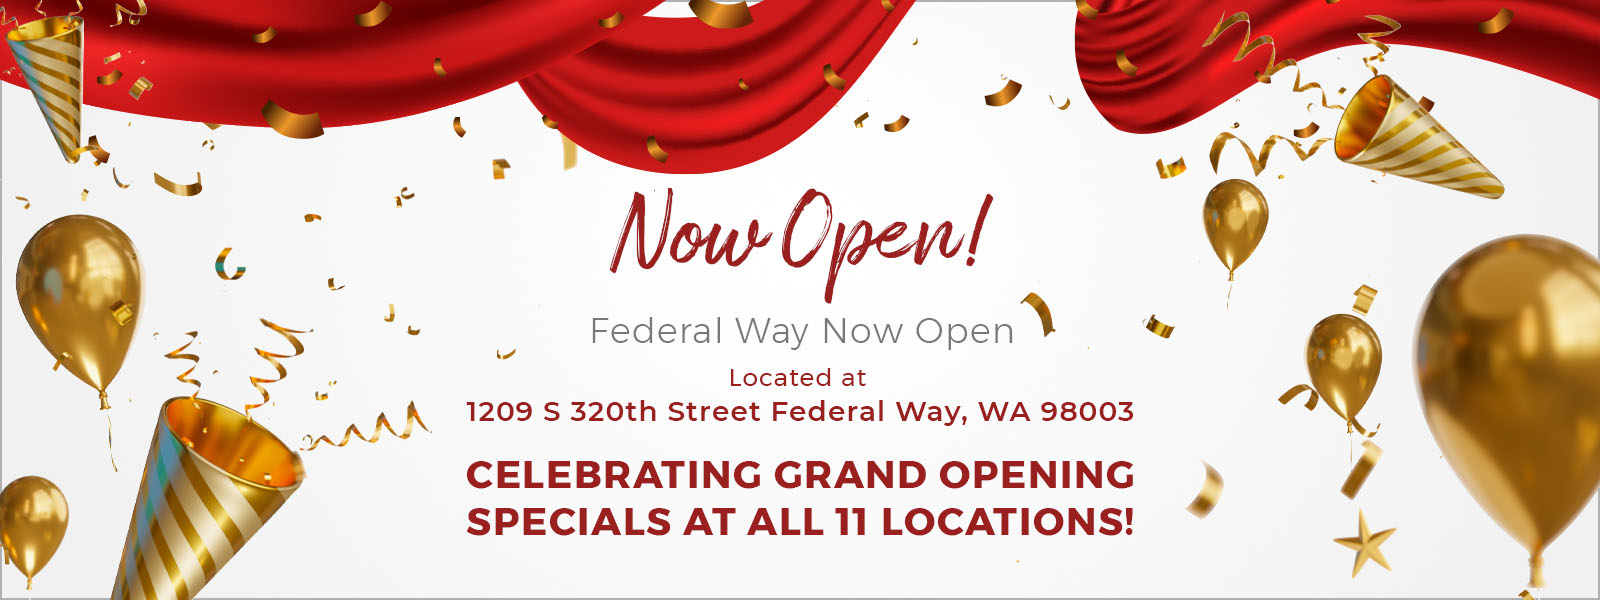 Federal Way Now Open!